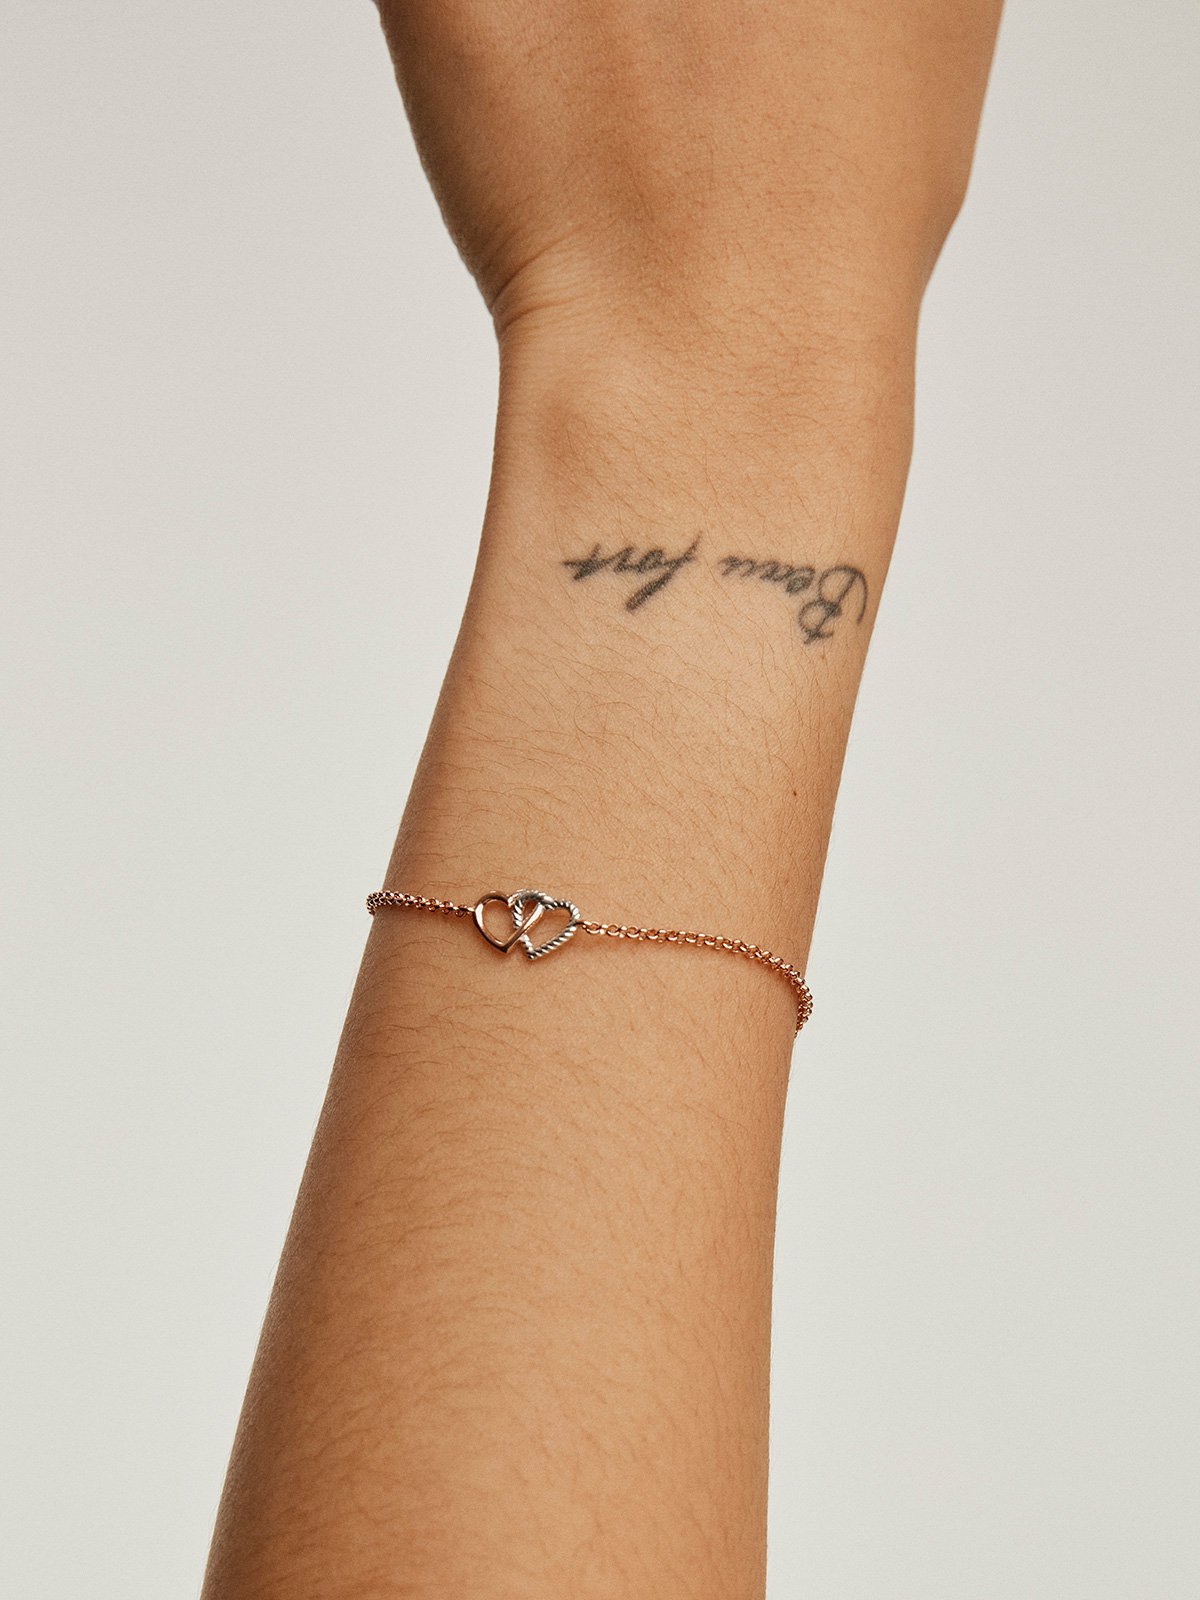 925 Silver bracelet and 925 silver bathed in 18K rose gold with a heart